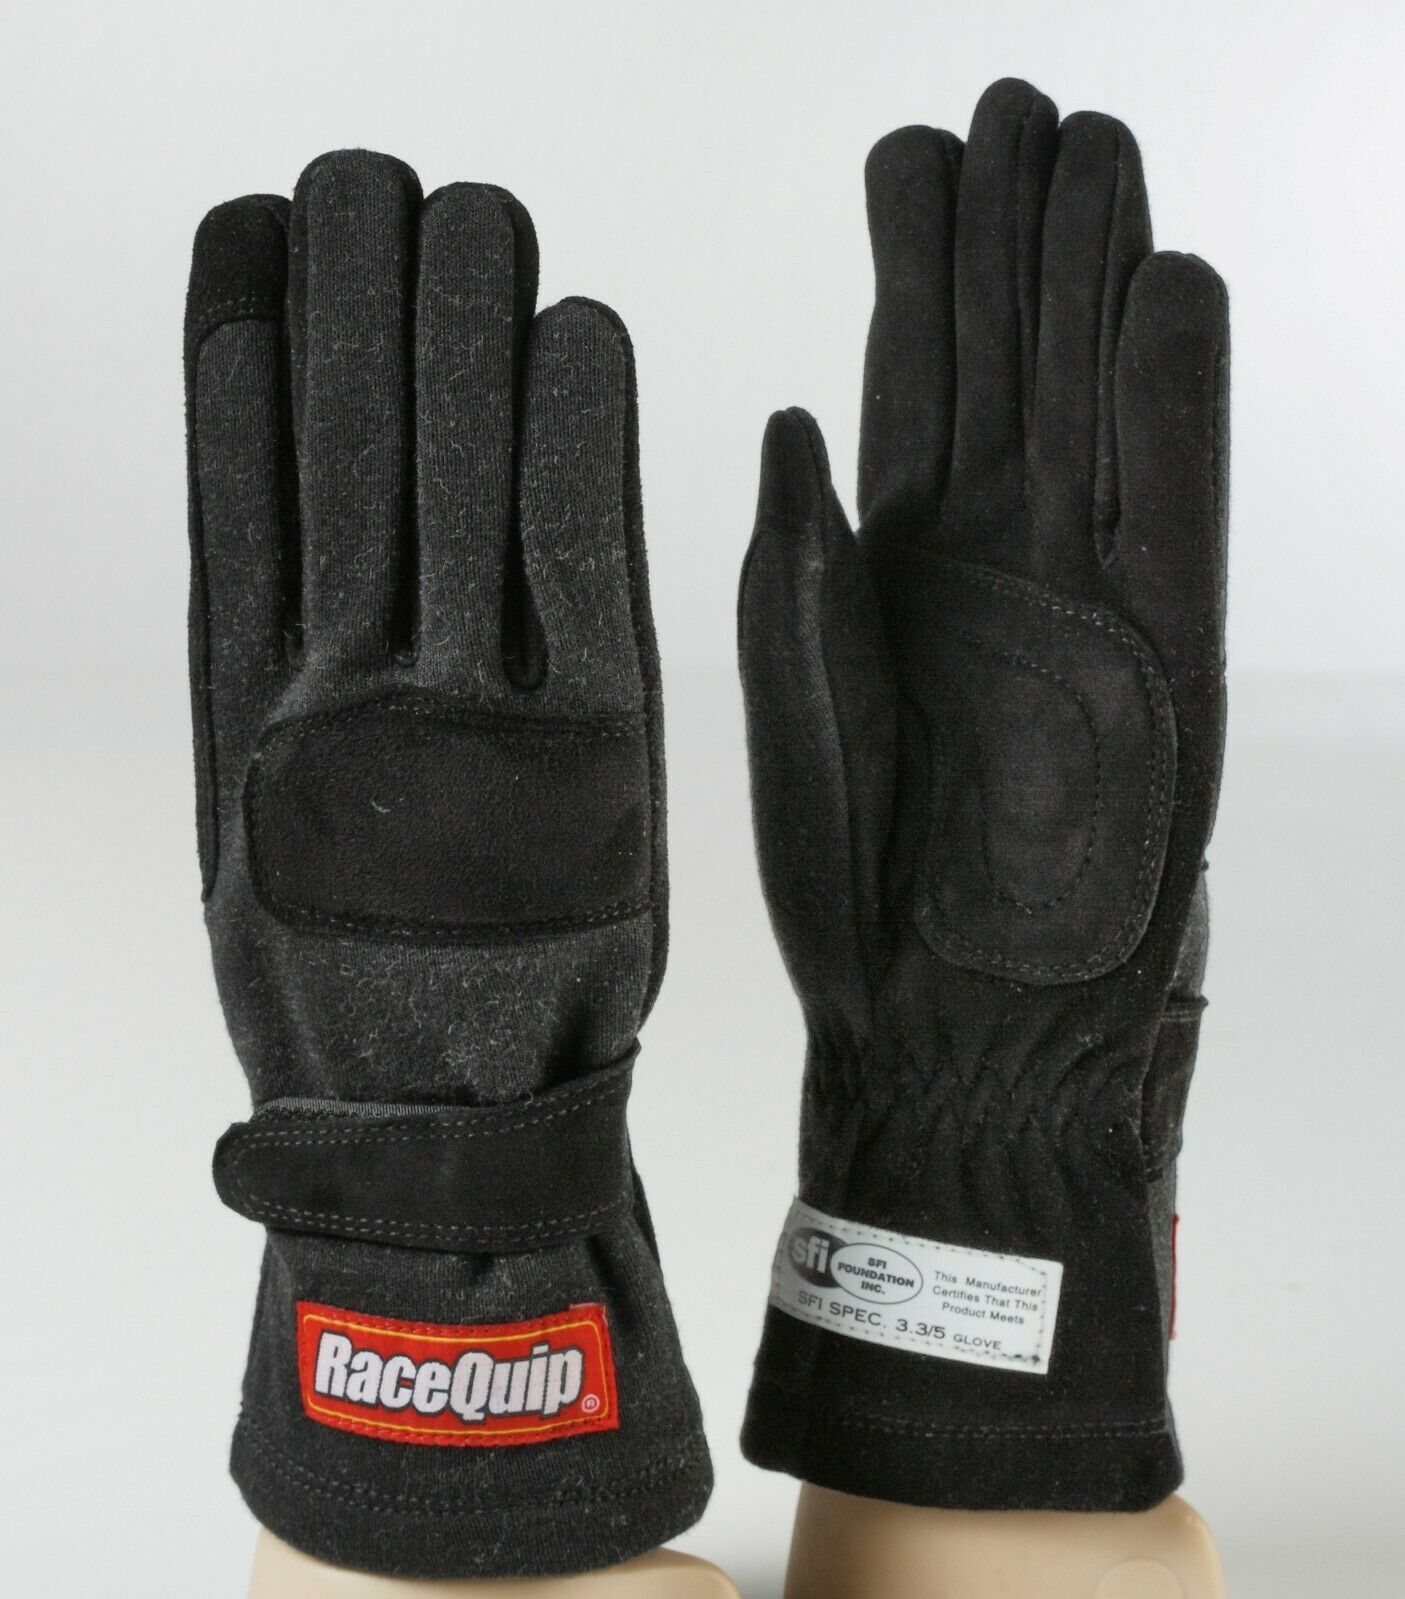 Racequip New - Kids Small - Multi-layer Driving Racing Gloves Sfi 3.3/5 Rated